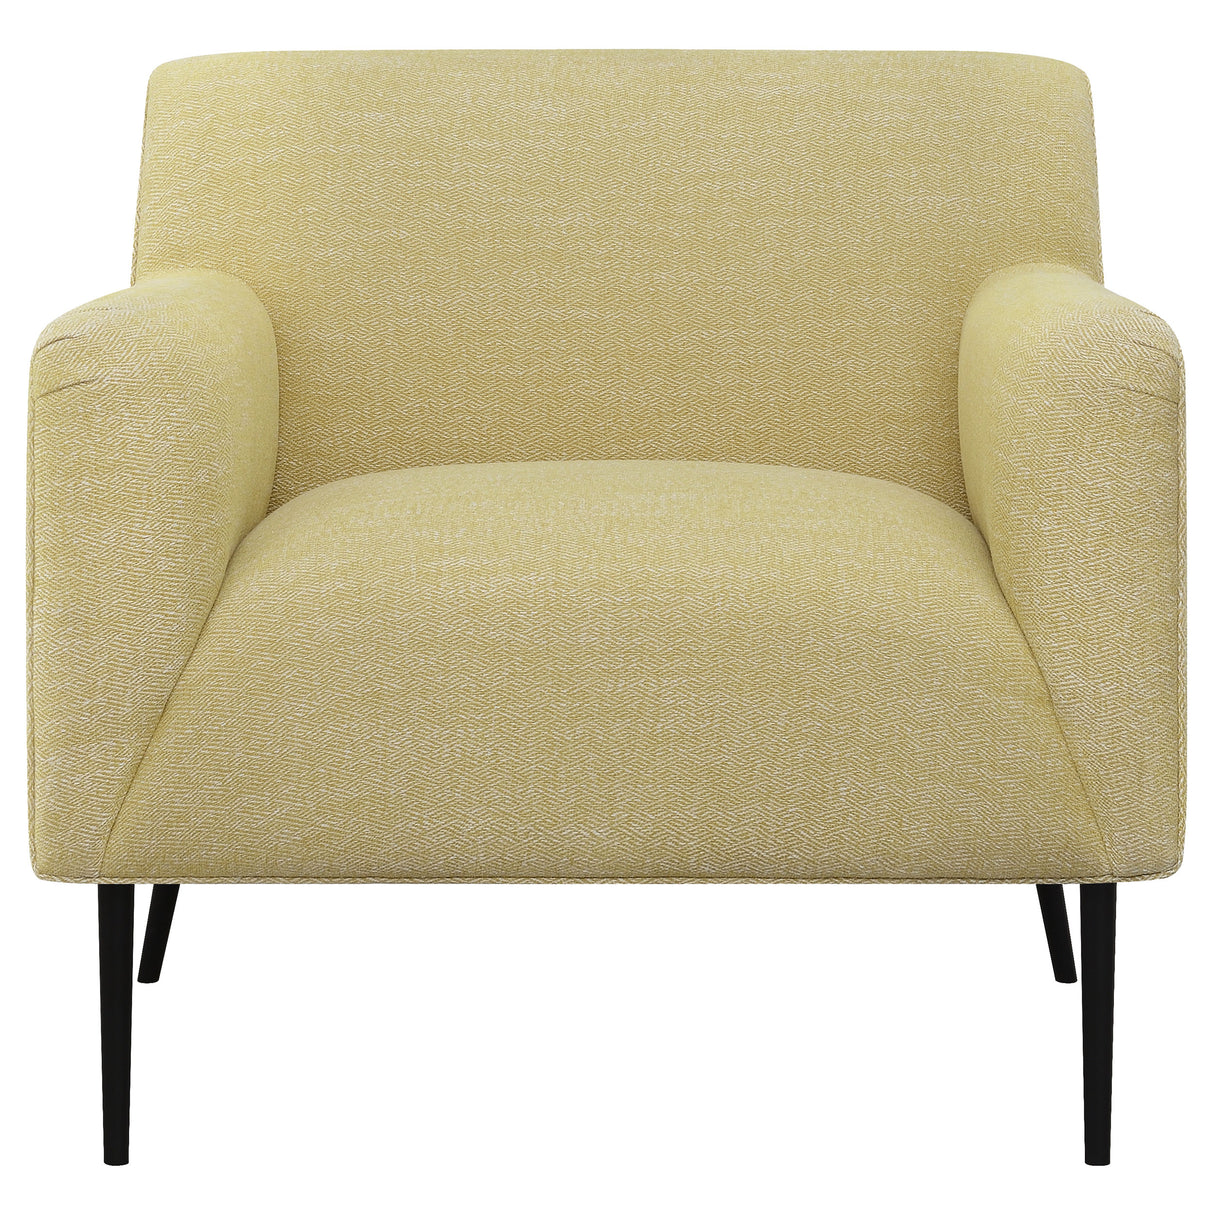 Accent Chair - Darlene Upholstered Track Arms Accent Chair Lemon